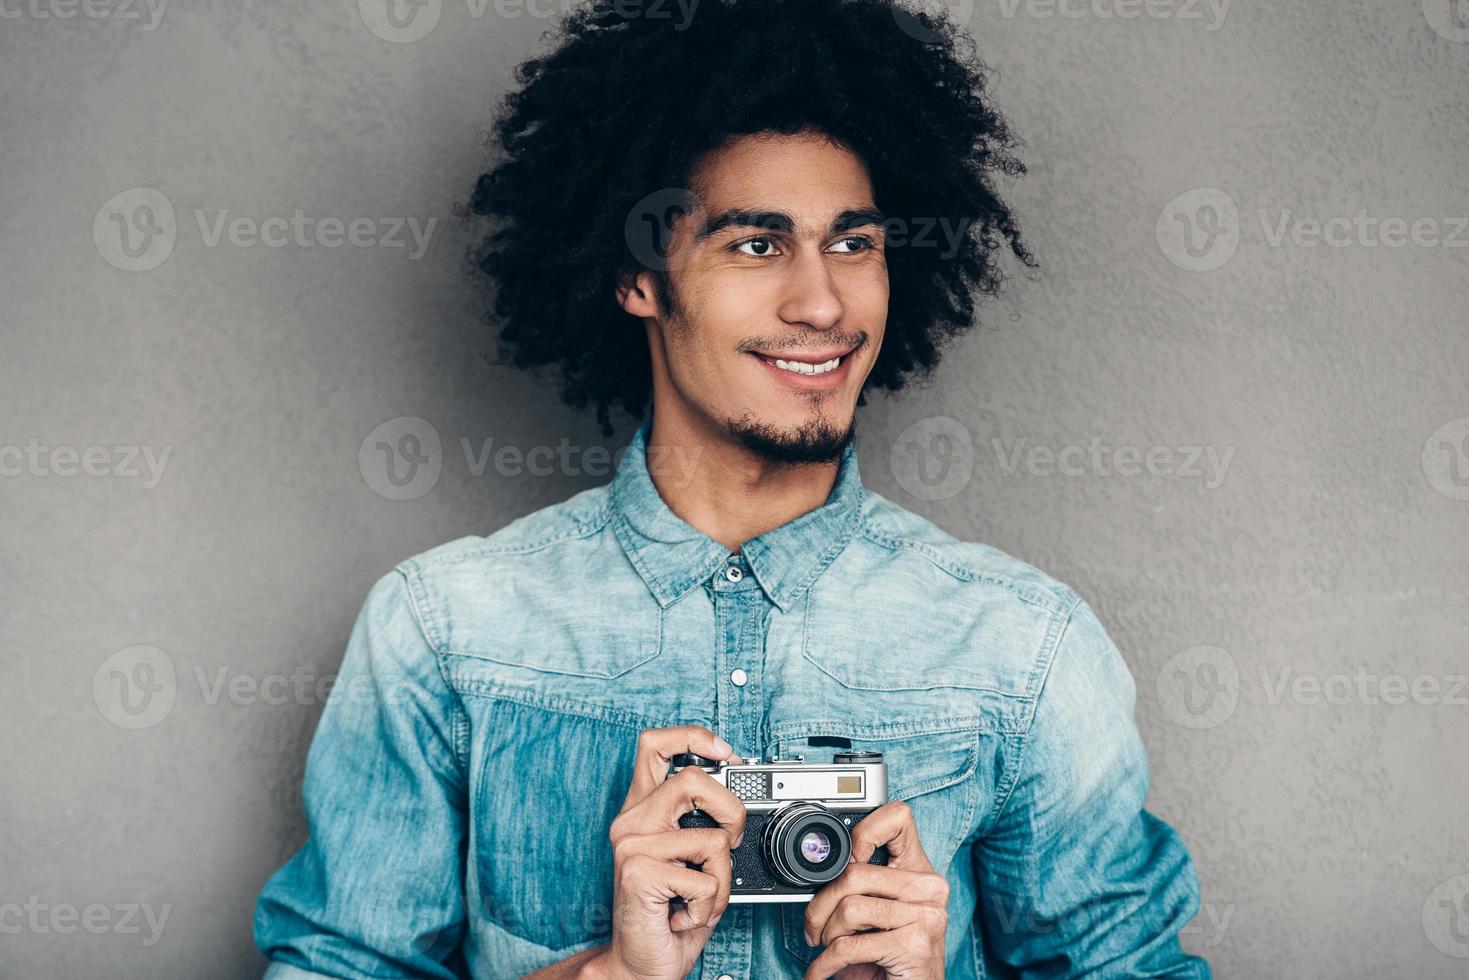 Modern photographer. Handsome young African man holding retro styled camera and looking away with smile while standing against grey background photo